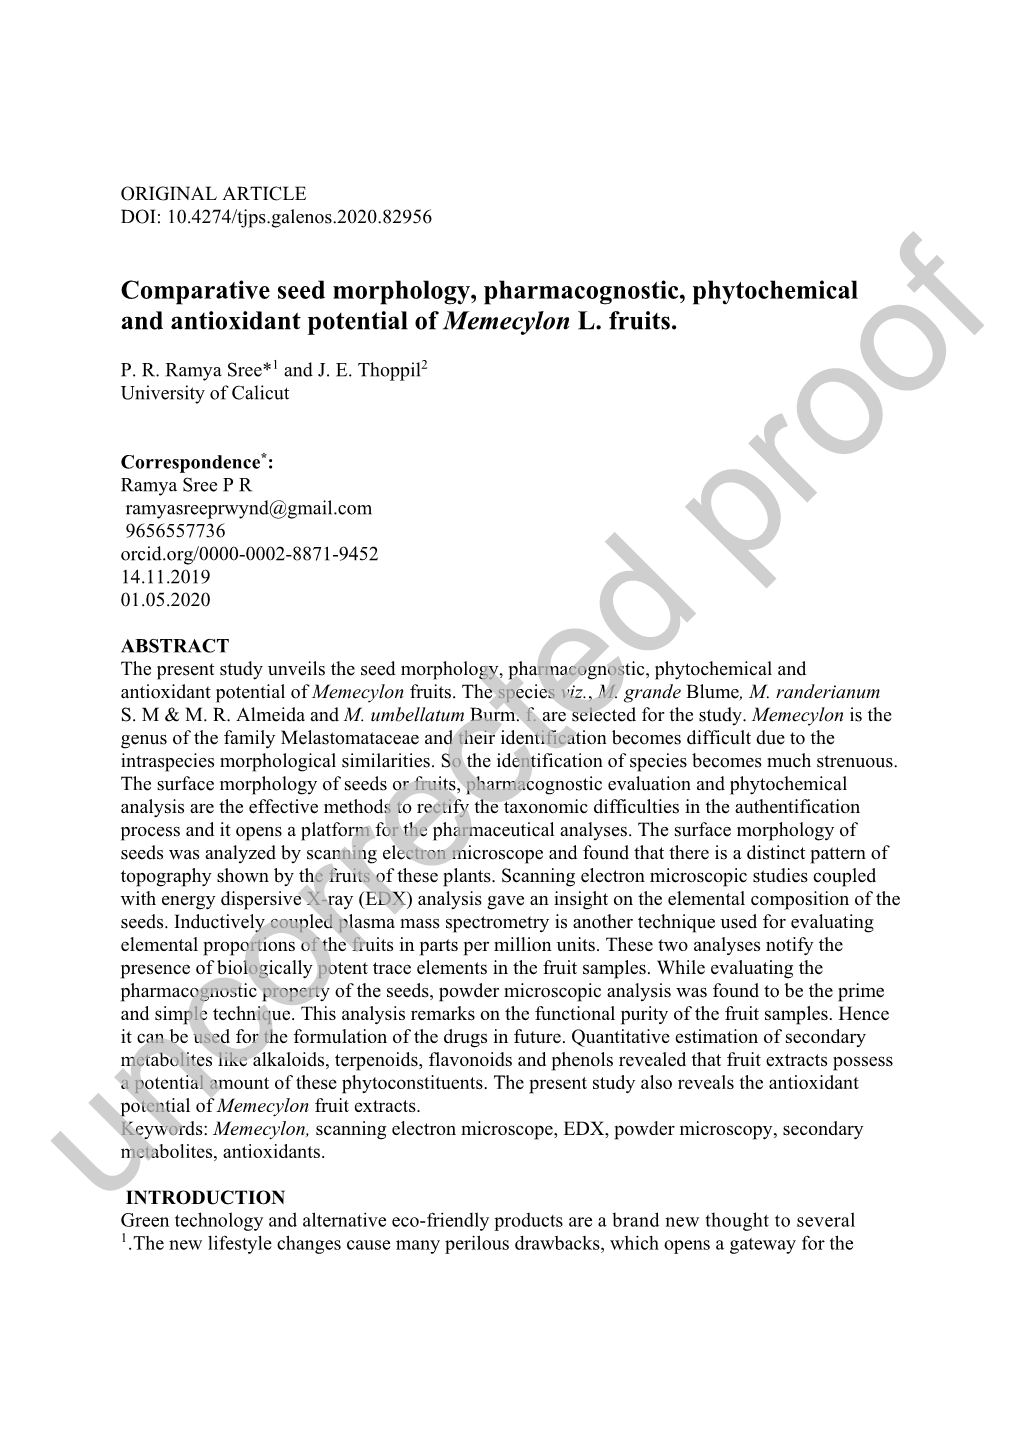 Comparative Seed Morphology, Pharmacognostic, Phytochemical and Antioxidant Potential of Memecylon L